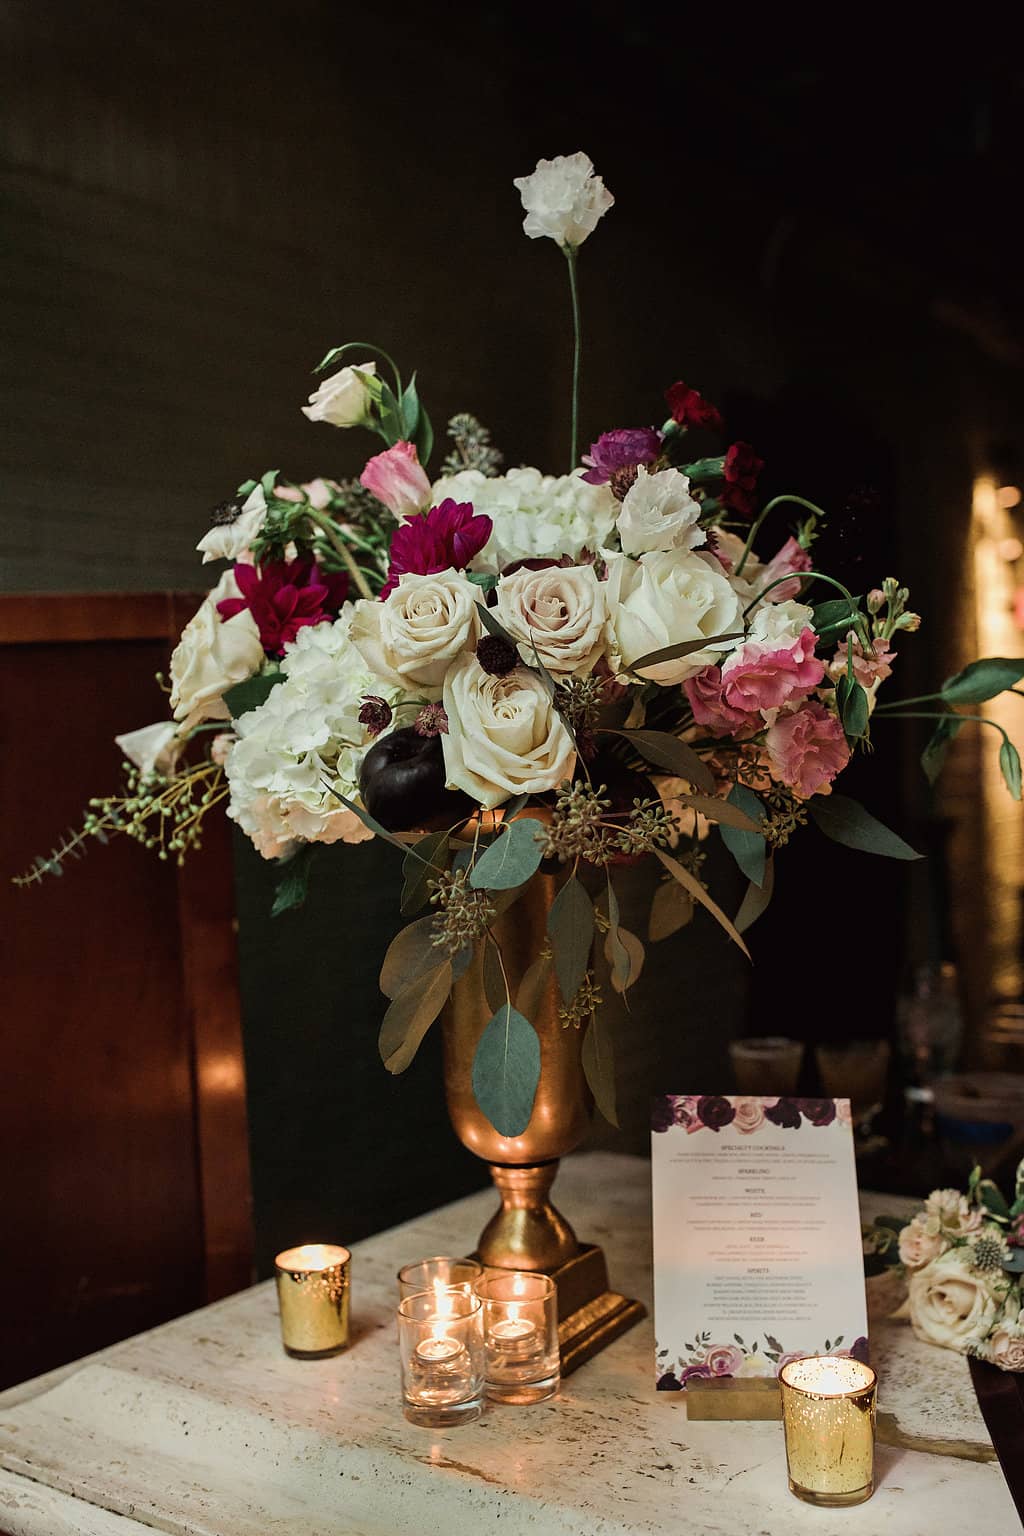 Rich floral decor with candles on moody table